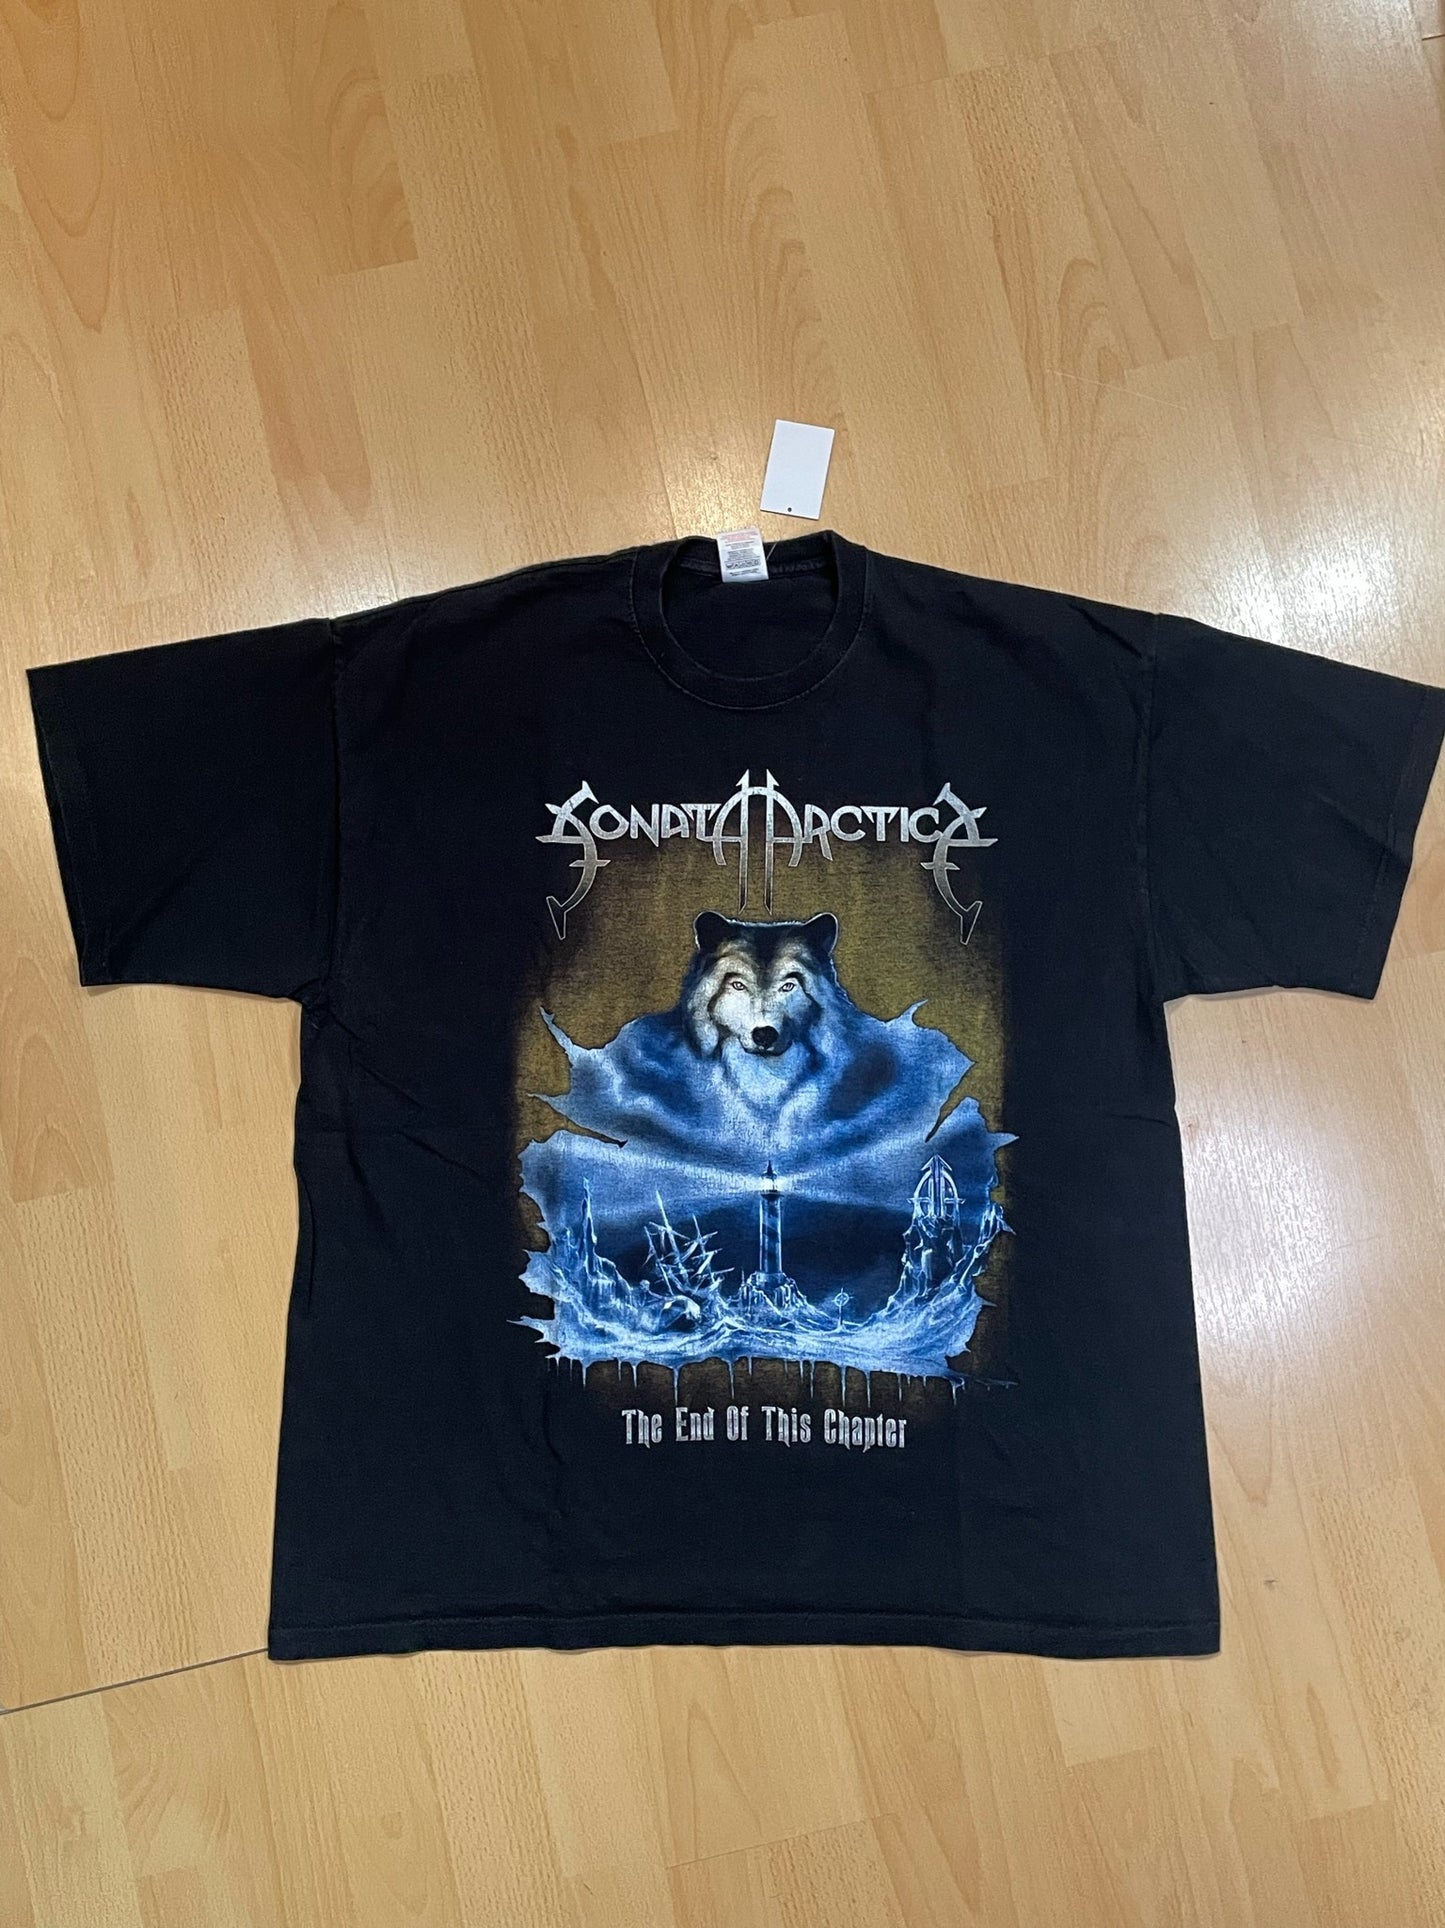 SONATA ARCTICA "THE END OF THIS CHAPTER-1999 - 2006" MUSIC BAND T-SHIRT  SZ: XL